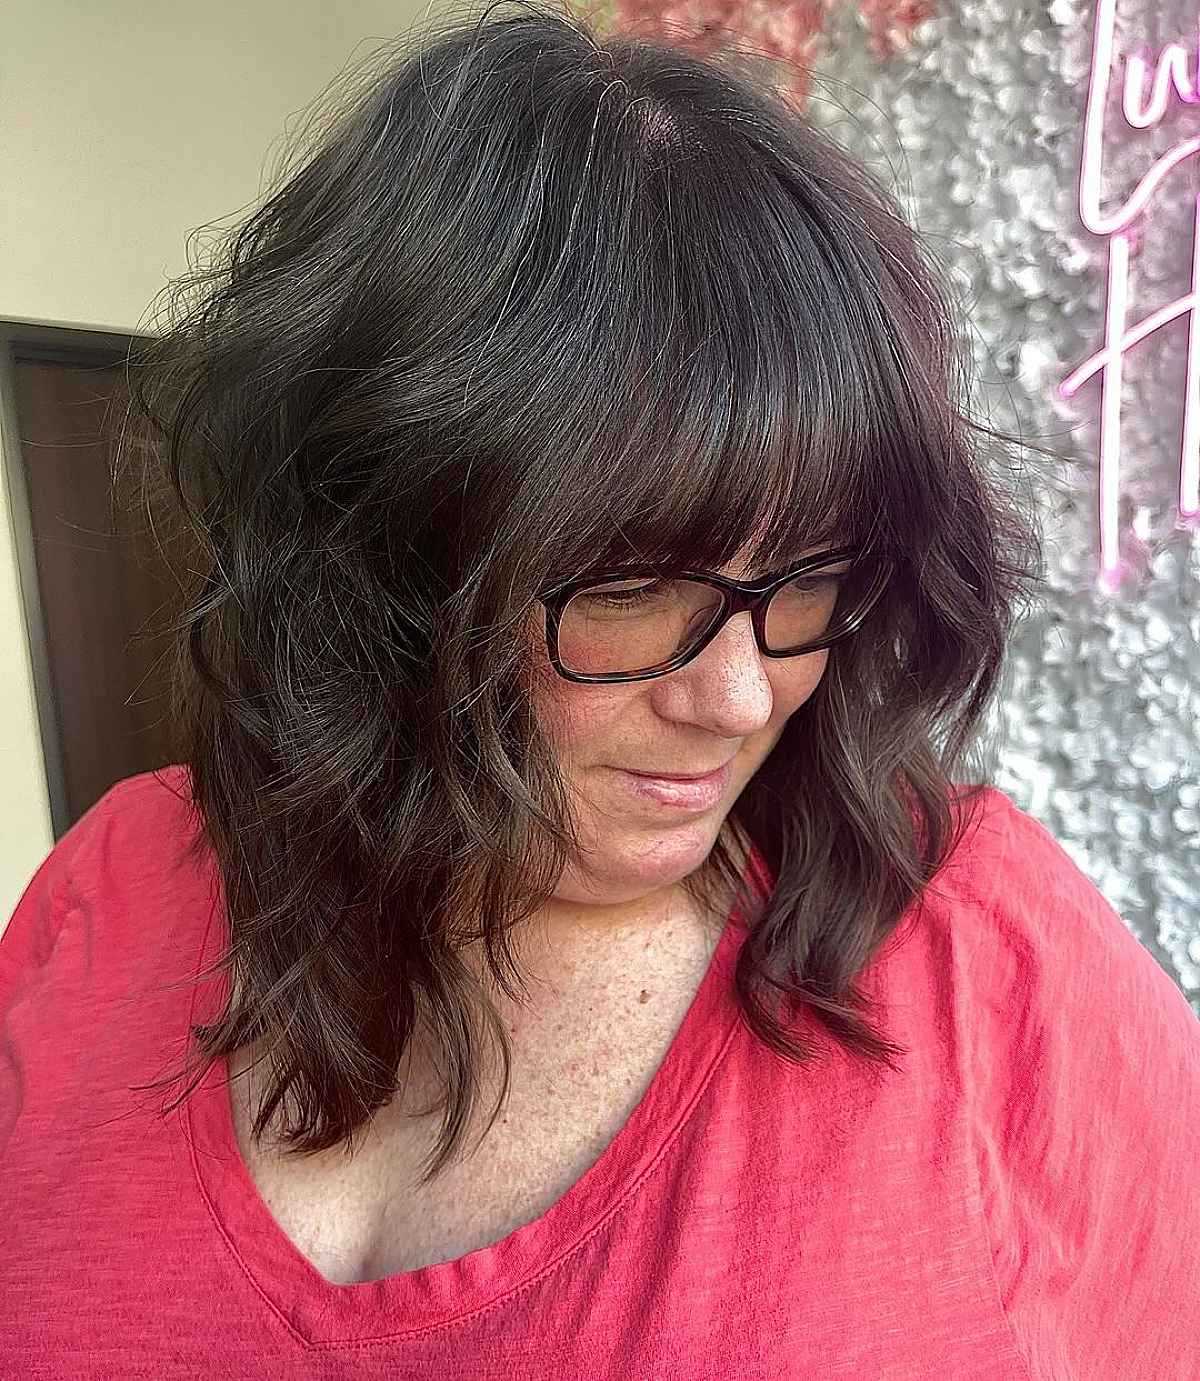 Shaggy Long Hair for Older Ladies with Glasses